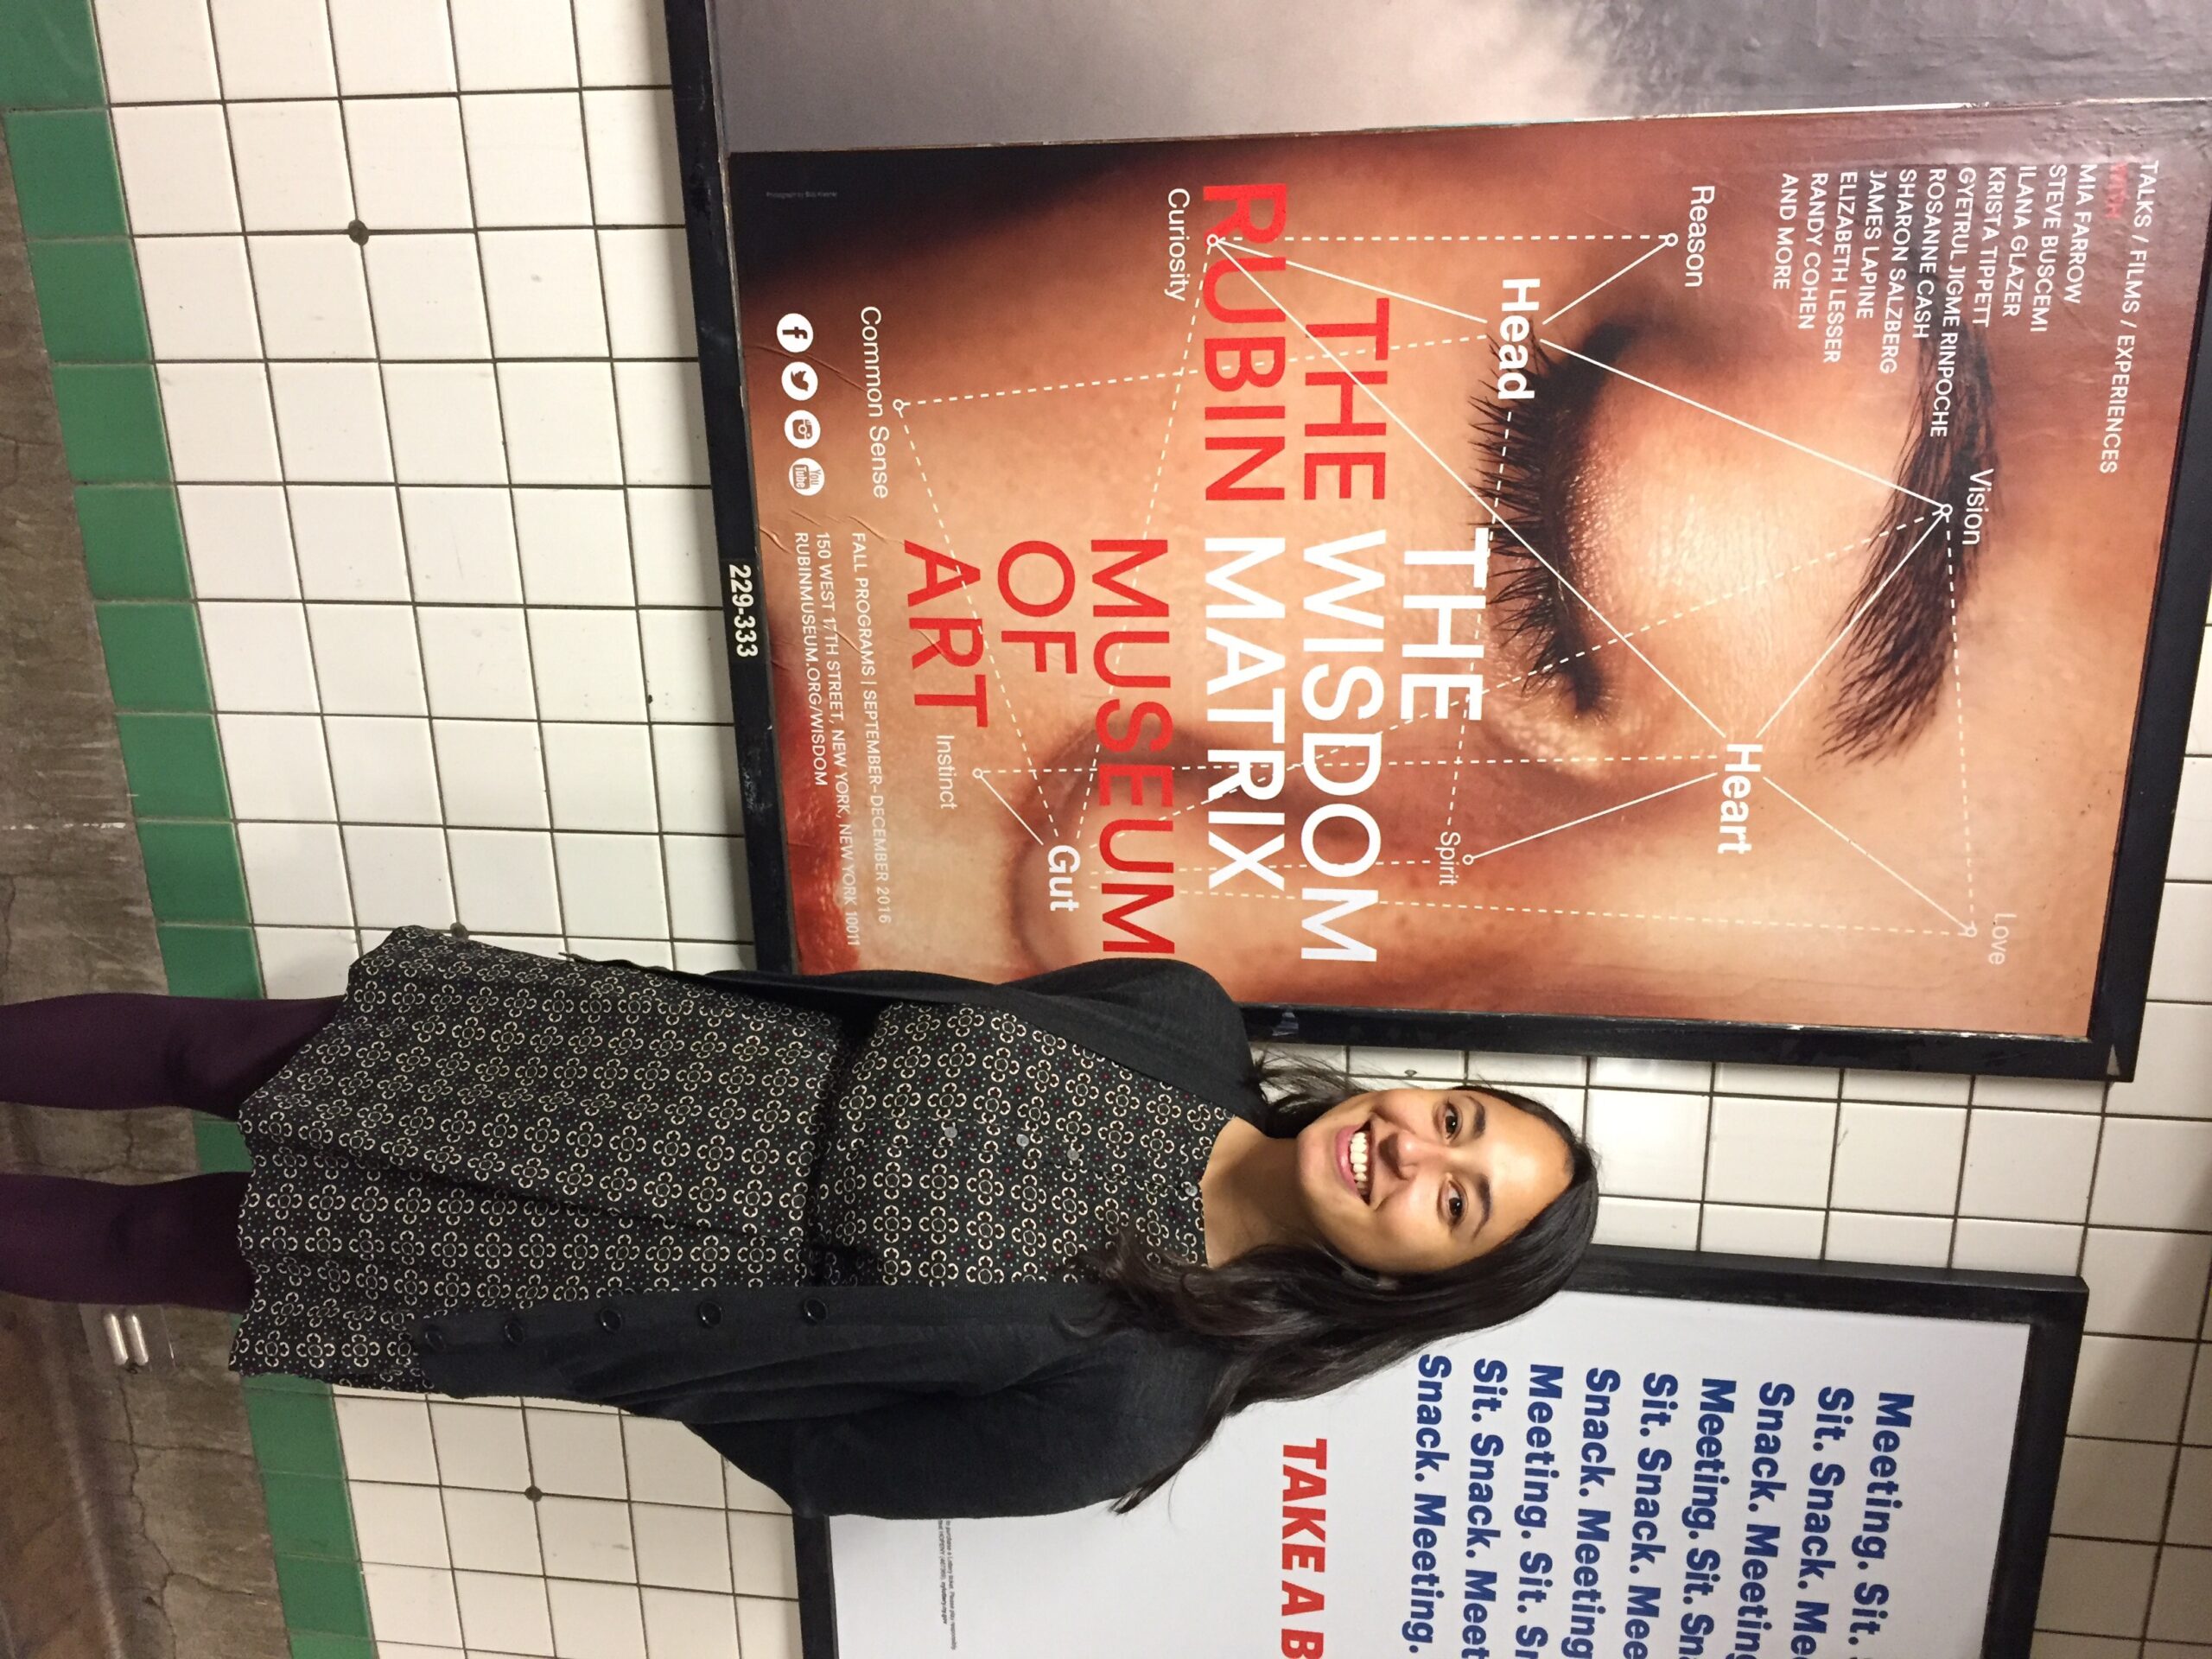 Laura in front of the Wisdom Matrix subway ad